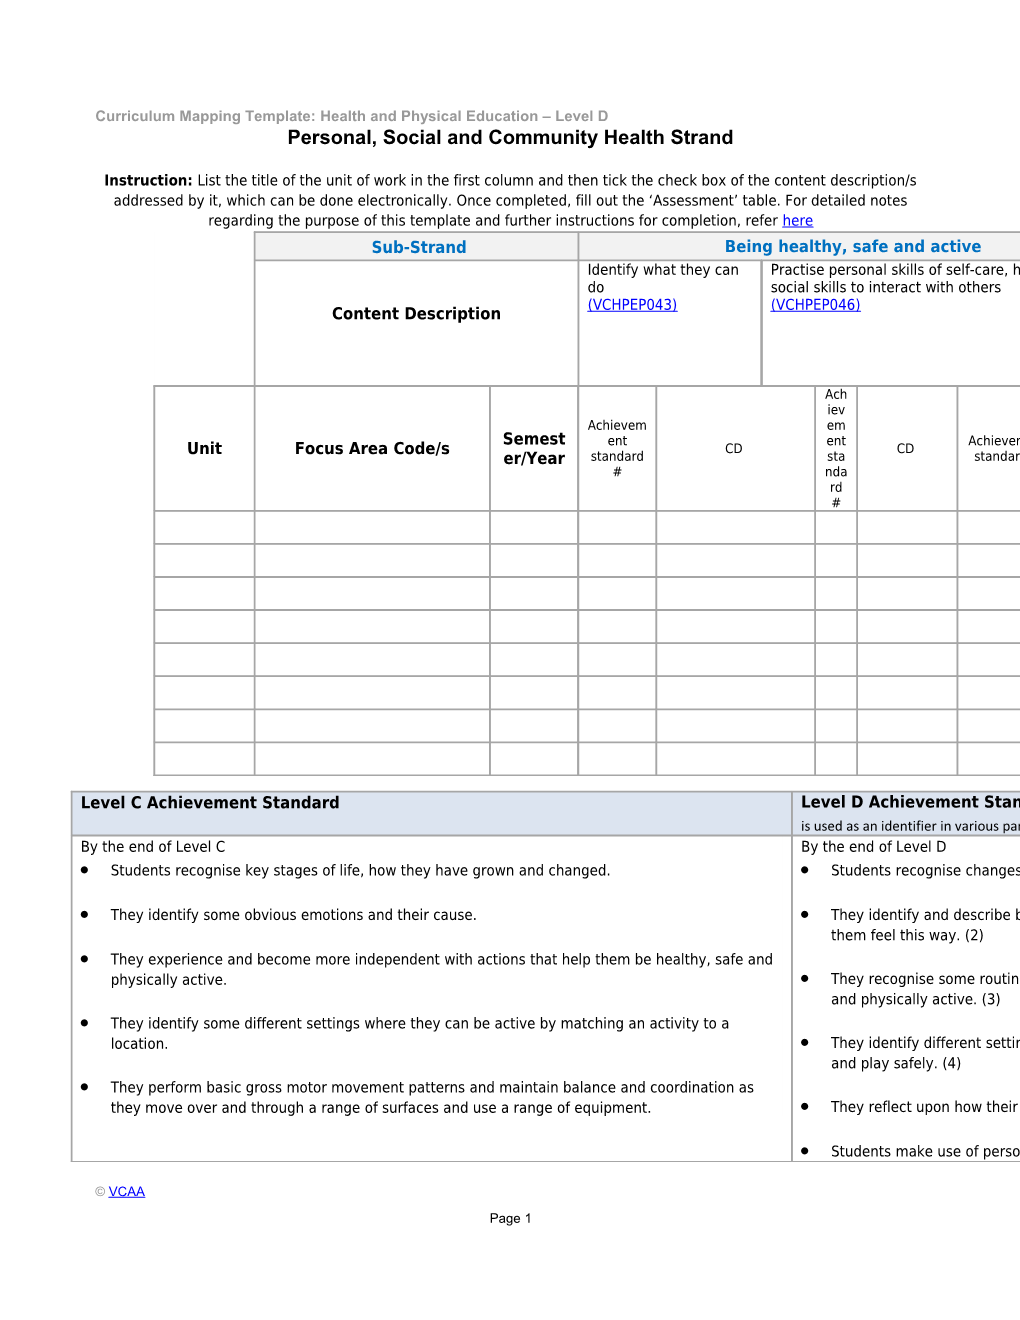 Curriculum Mapping Template: Health and Physical Education Level D